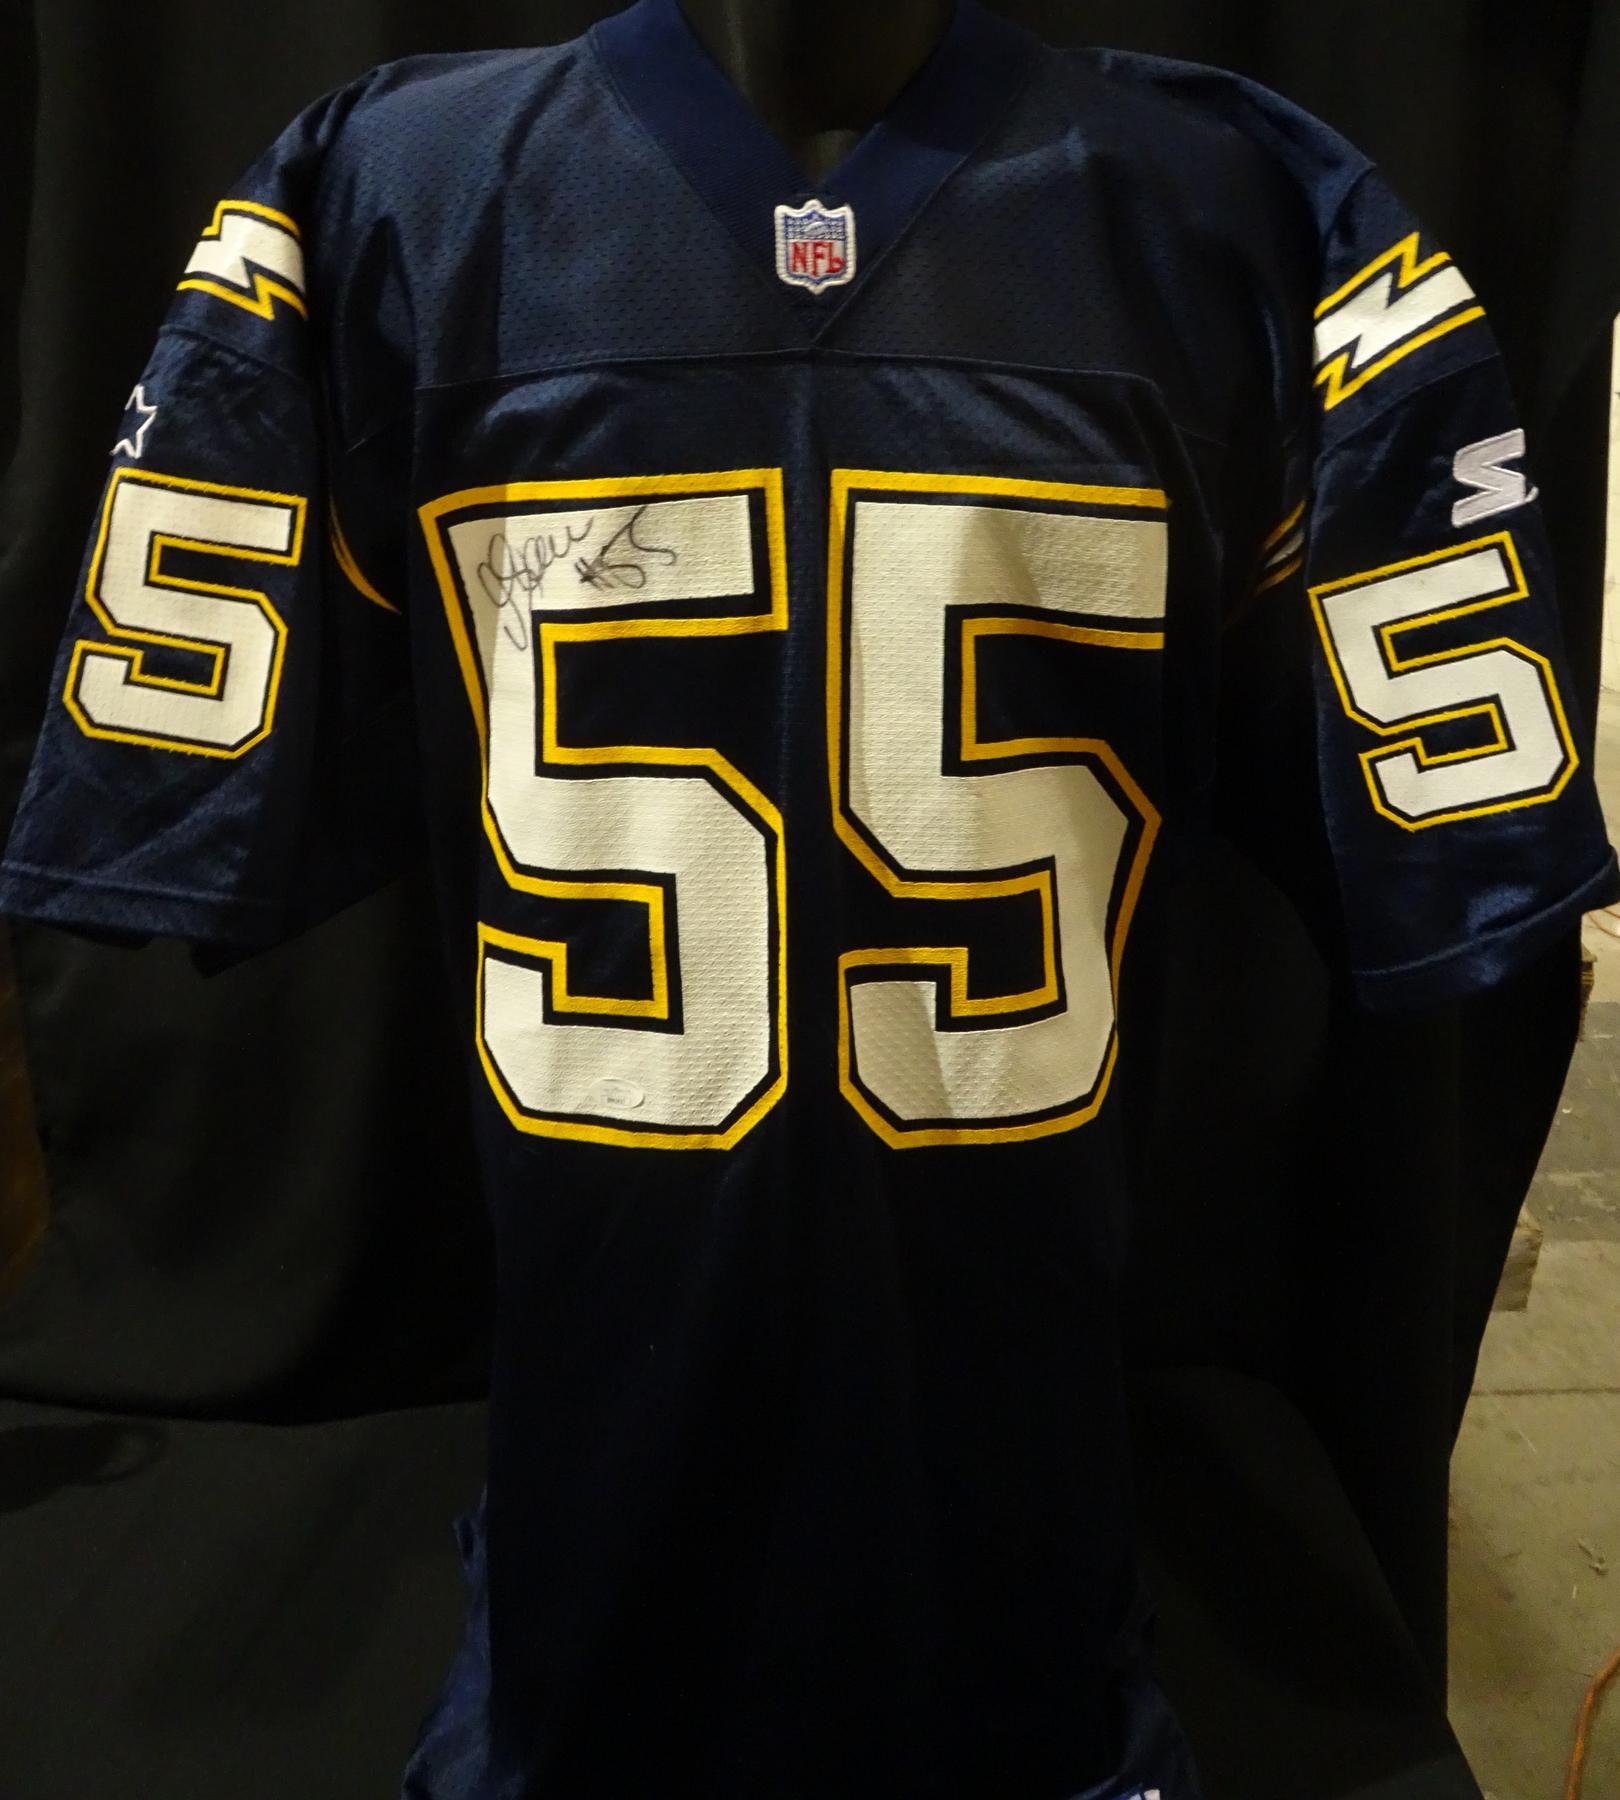 where can i buy a chargers jersey